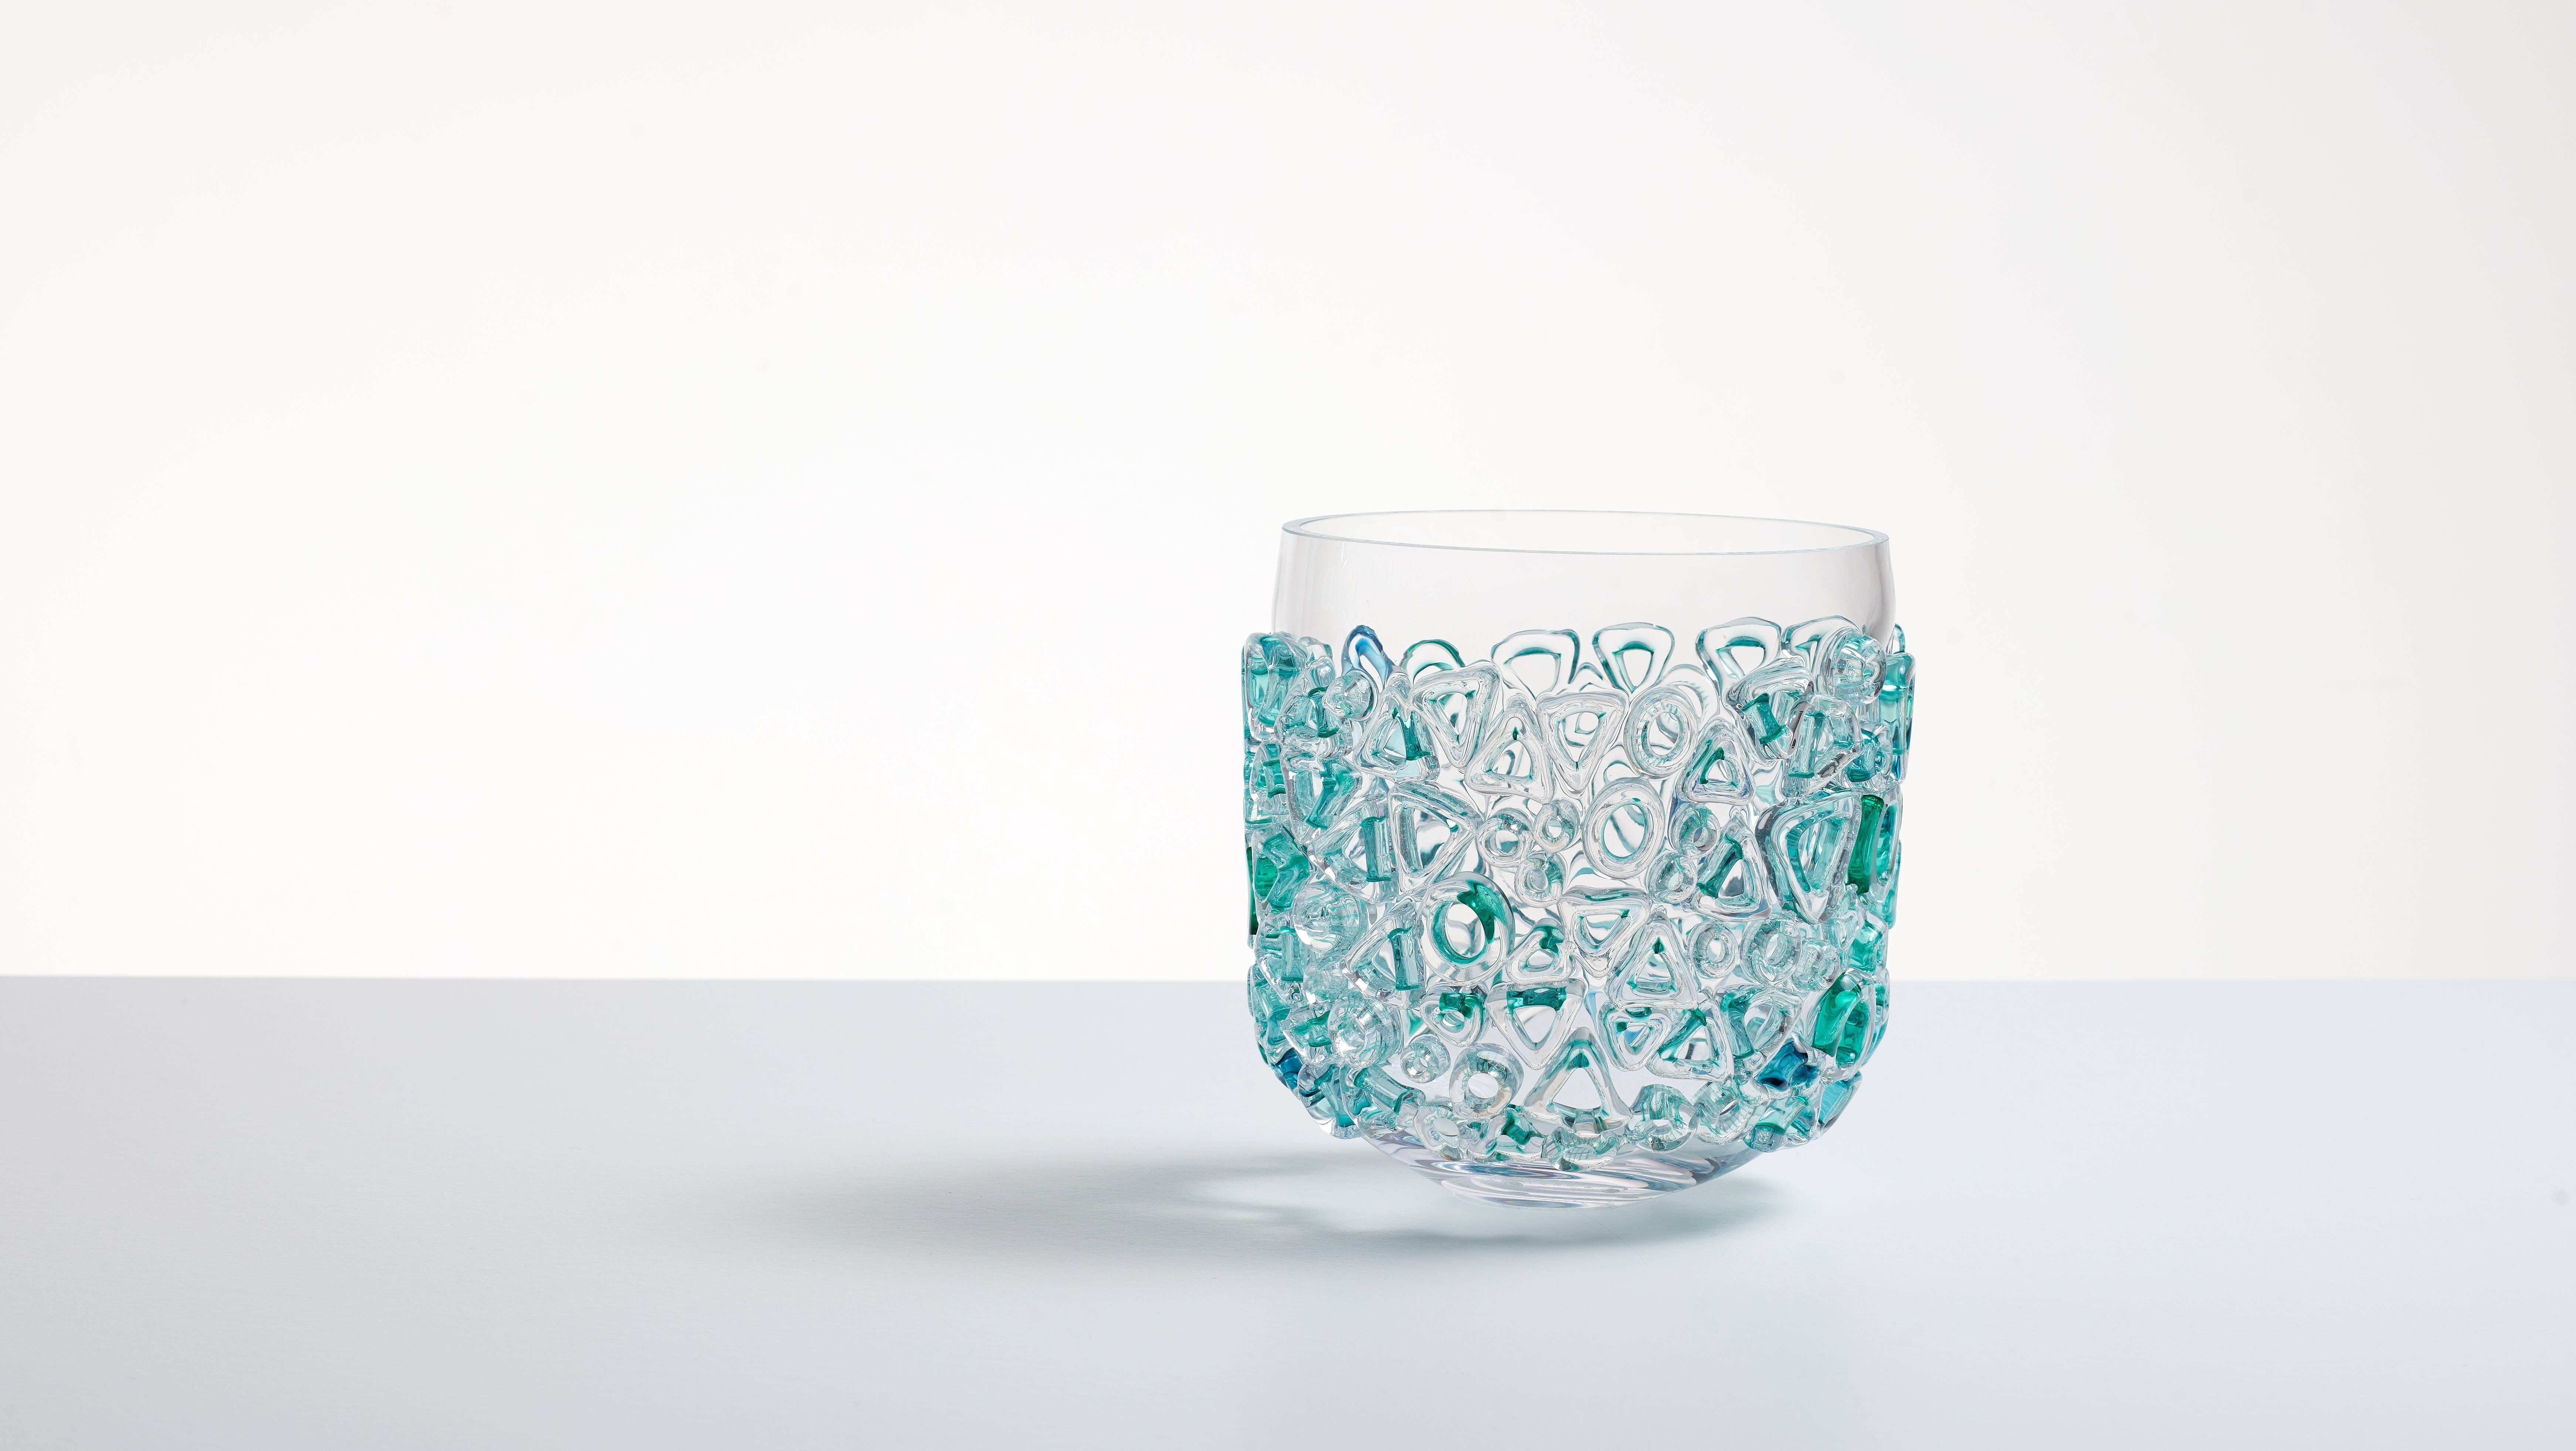 Clear glass vessel. Murano glass style glass bowl, clear glass with blue & green - Modern Sculpture by Sabine Lintzen